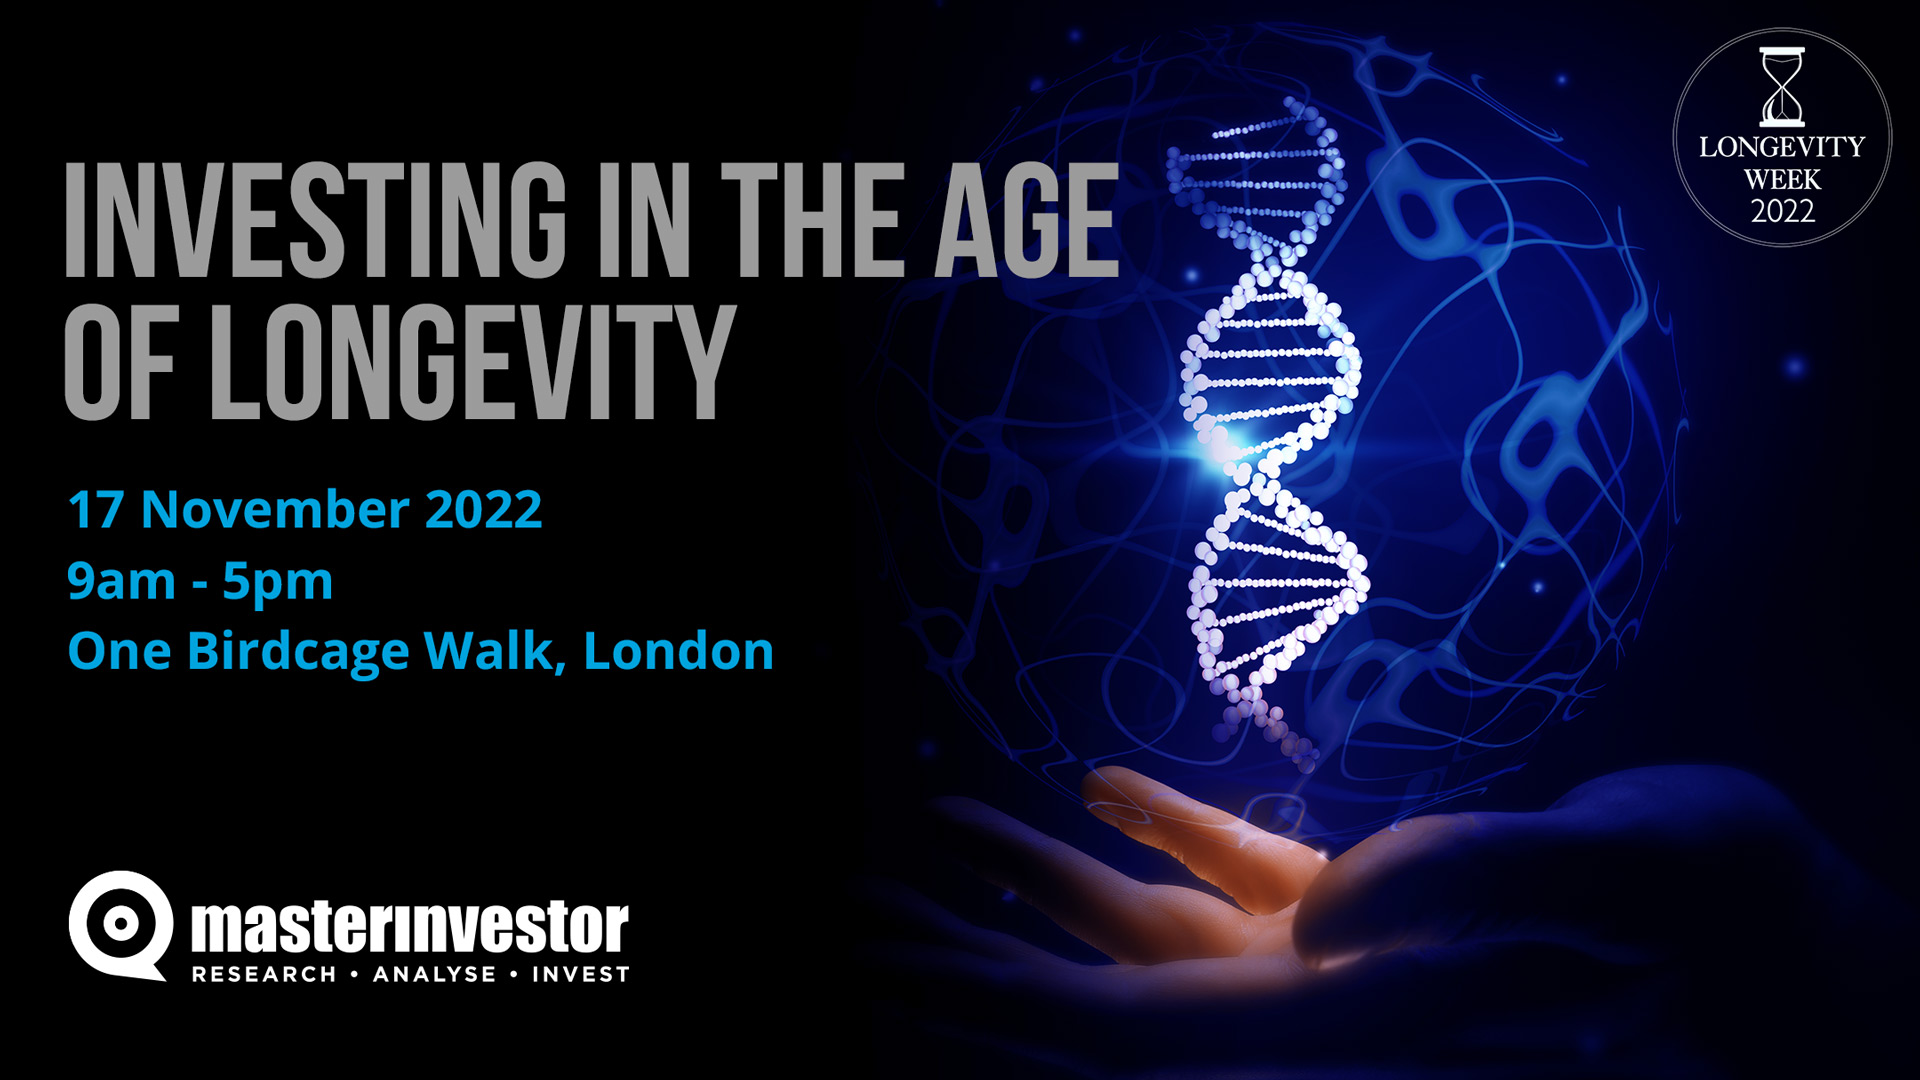 Investing in the Age of Longevity 2022